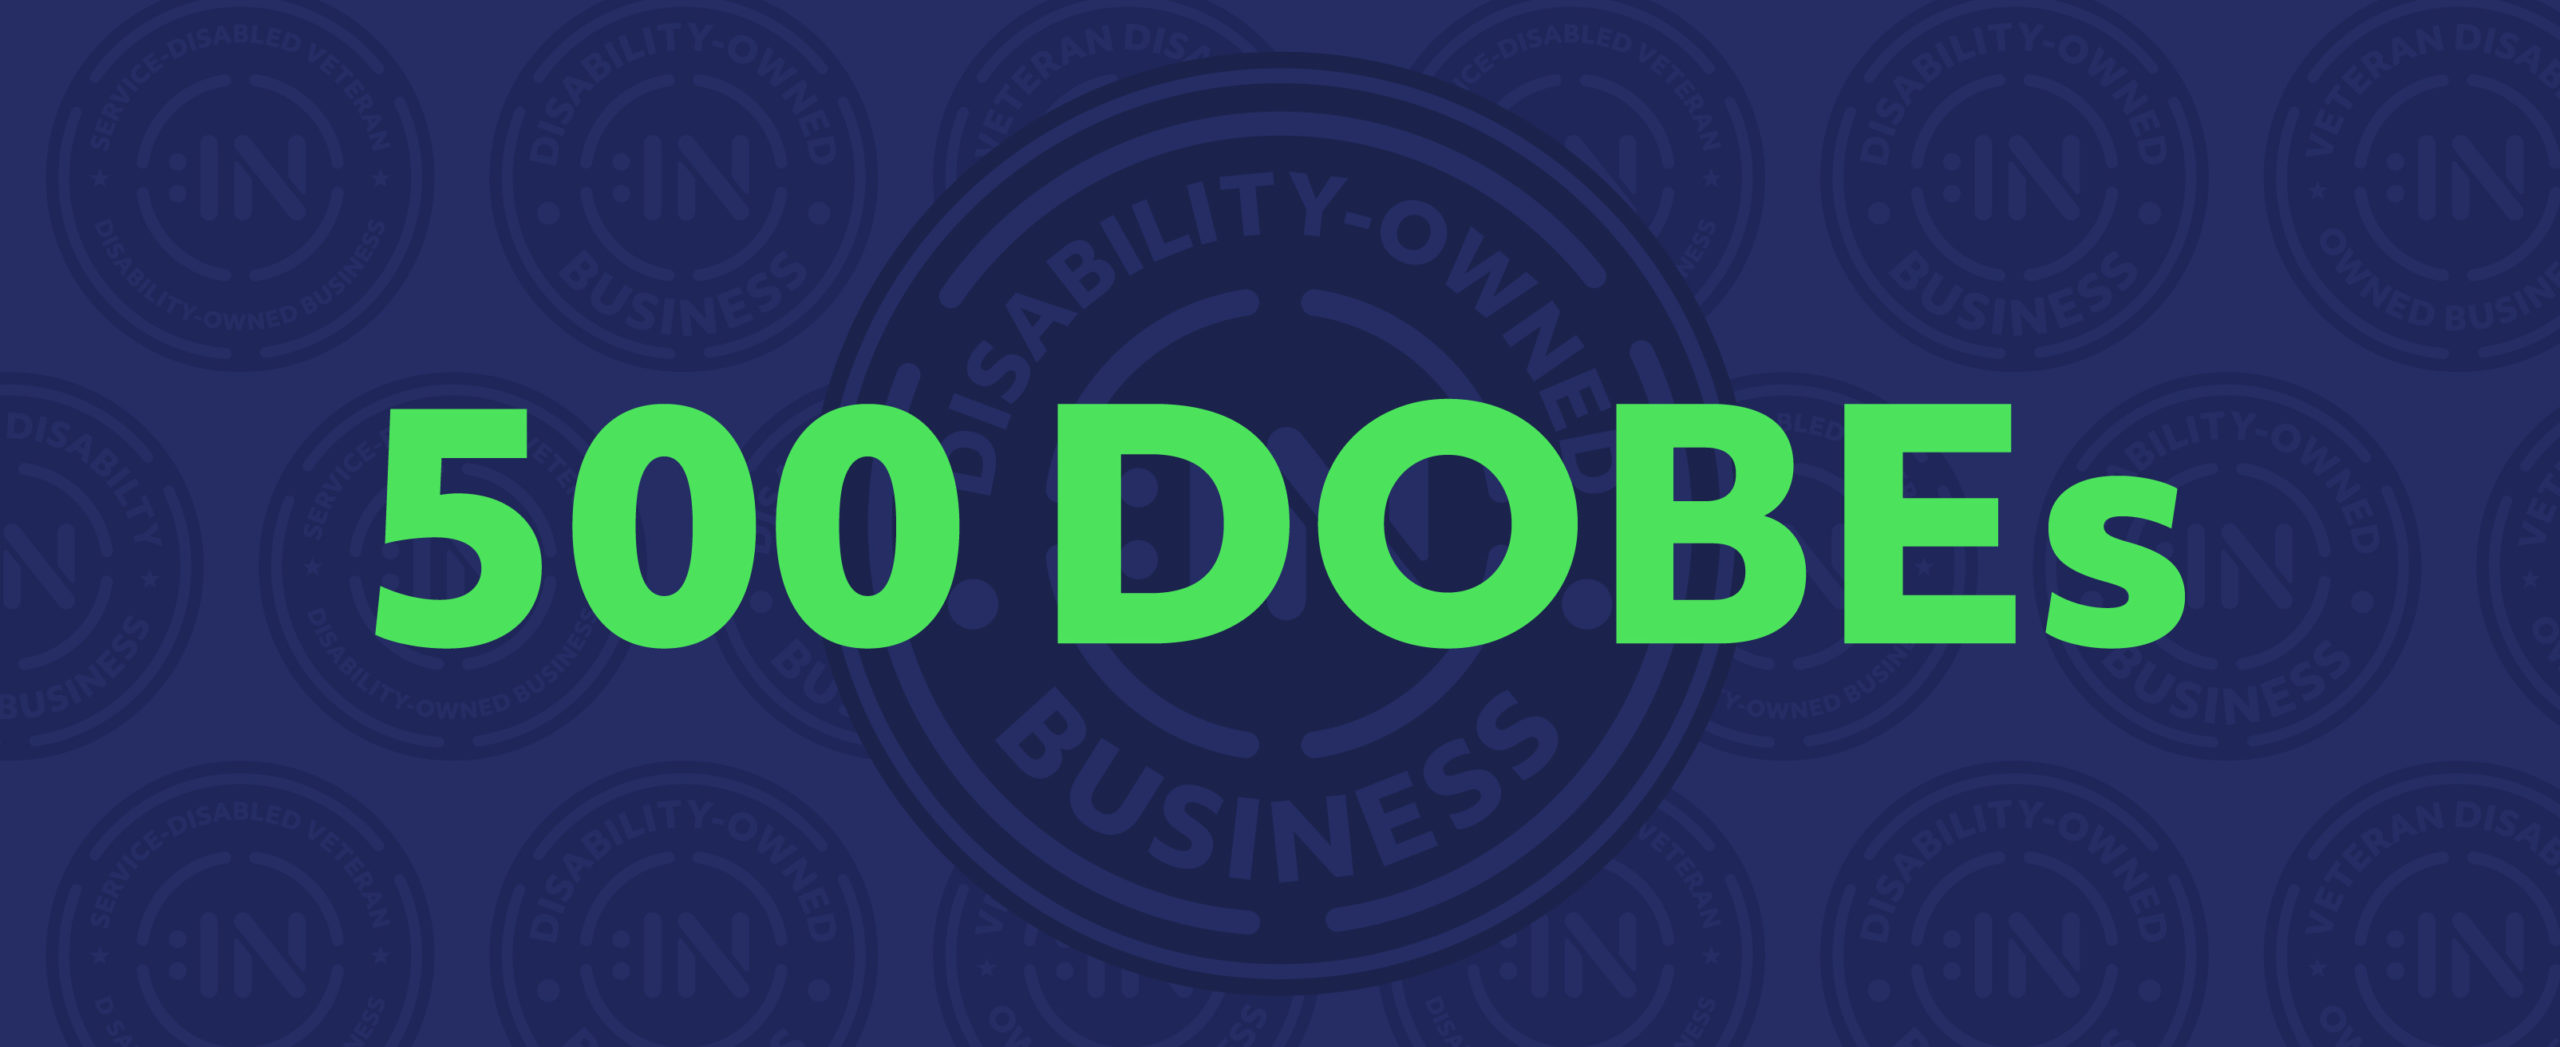 500 Disability-Owned Business Enterprises (DOBEs) in neon green text against a navy blue background of repeating DOBE logos.